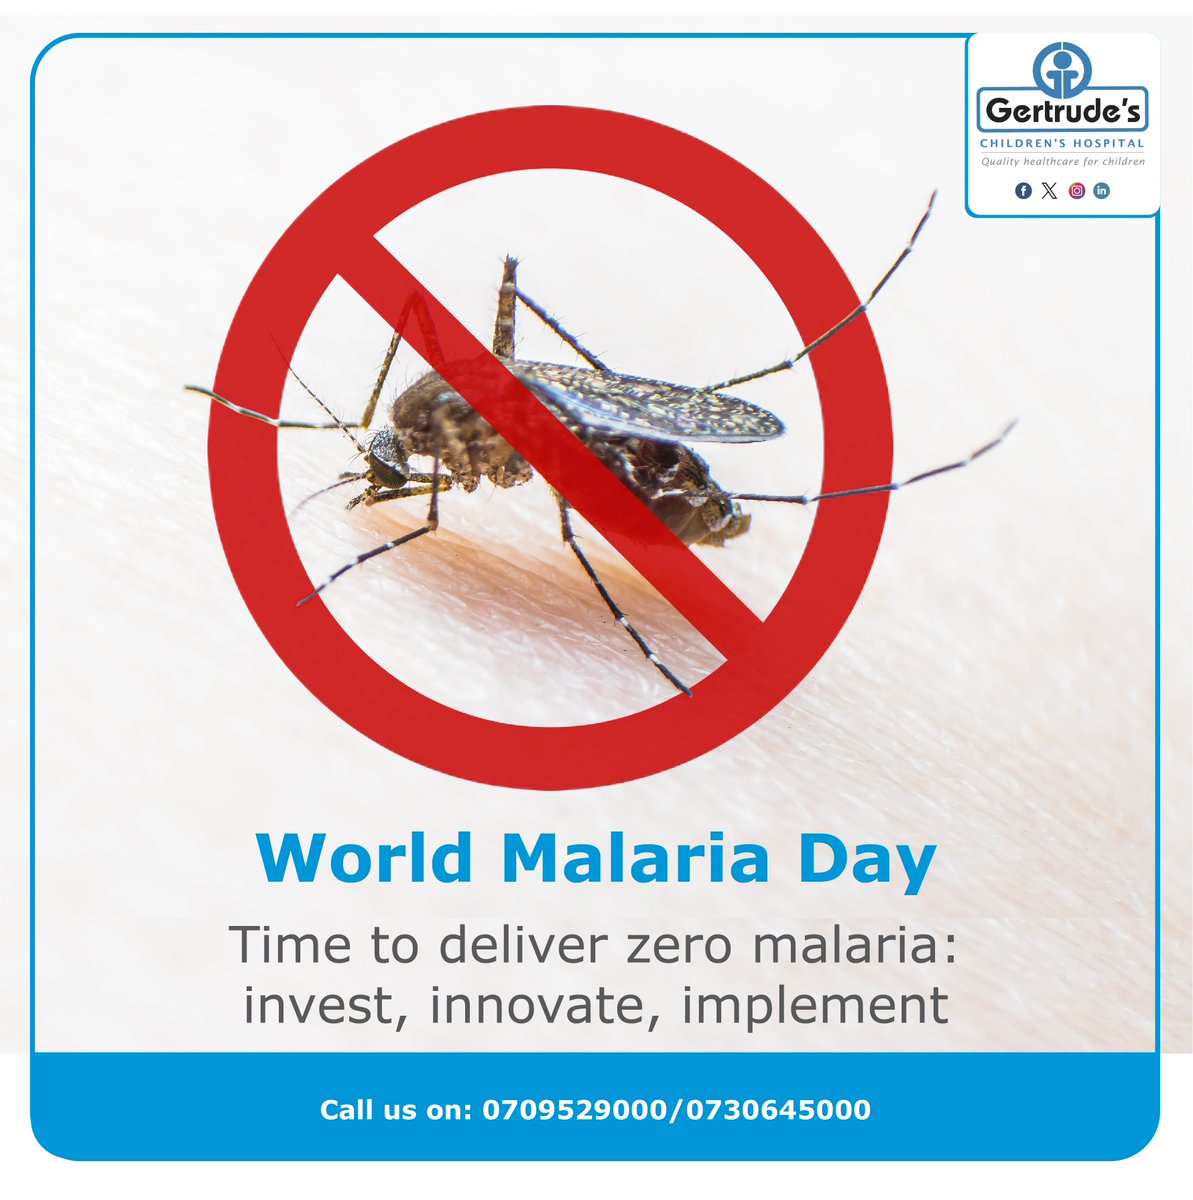 Malaria remains a global health challenge, but together, we can defeat it. On World Malaria Day, let's renew our commitment to ending malaria for good. Call 0709529000. #GertrudesKe #EndMalaria